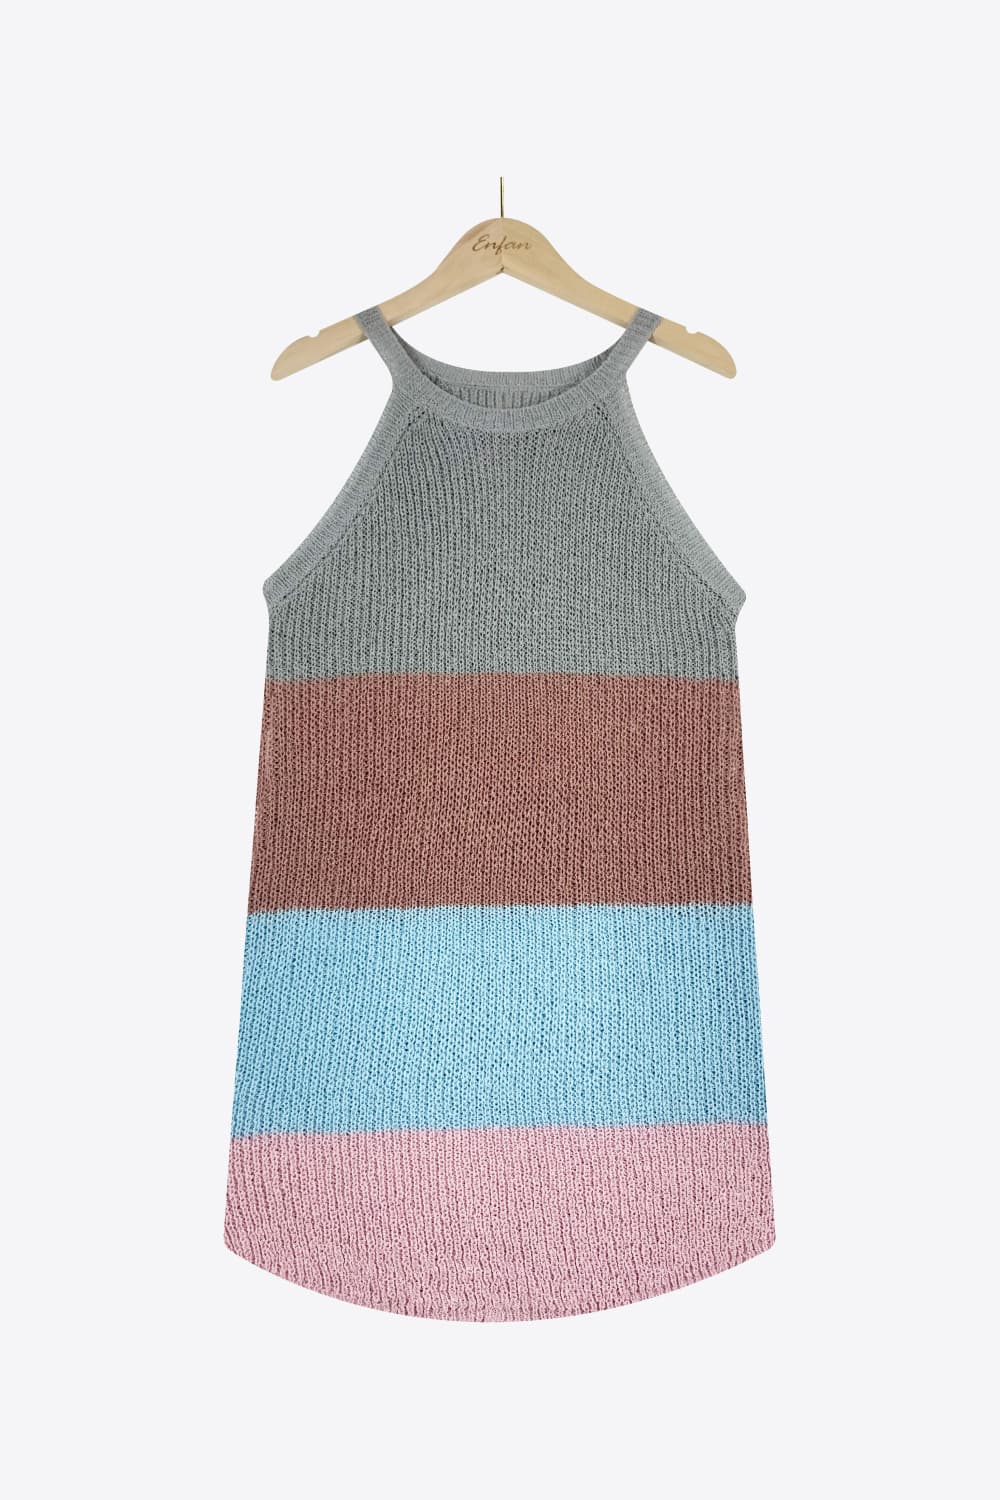 a tank top with multicolored stripes on it